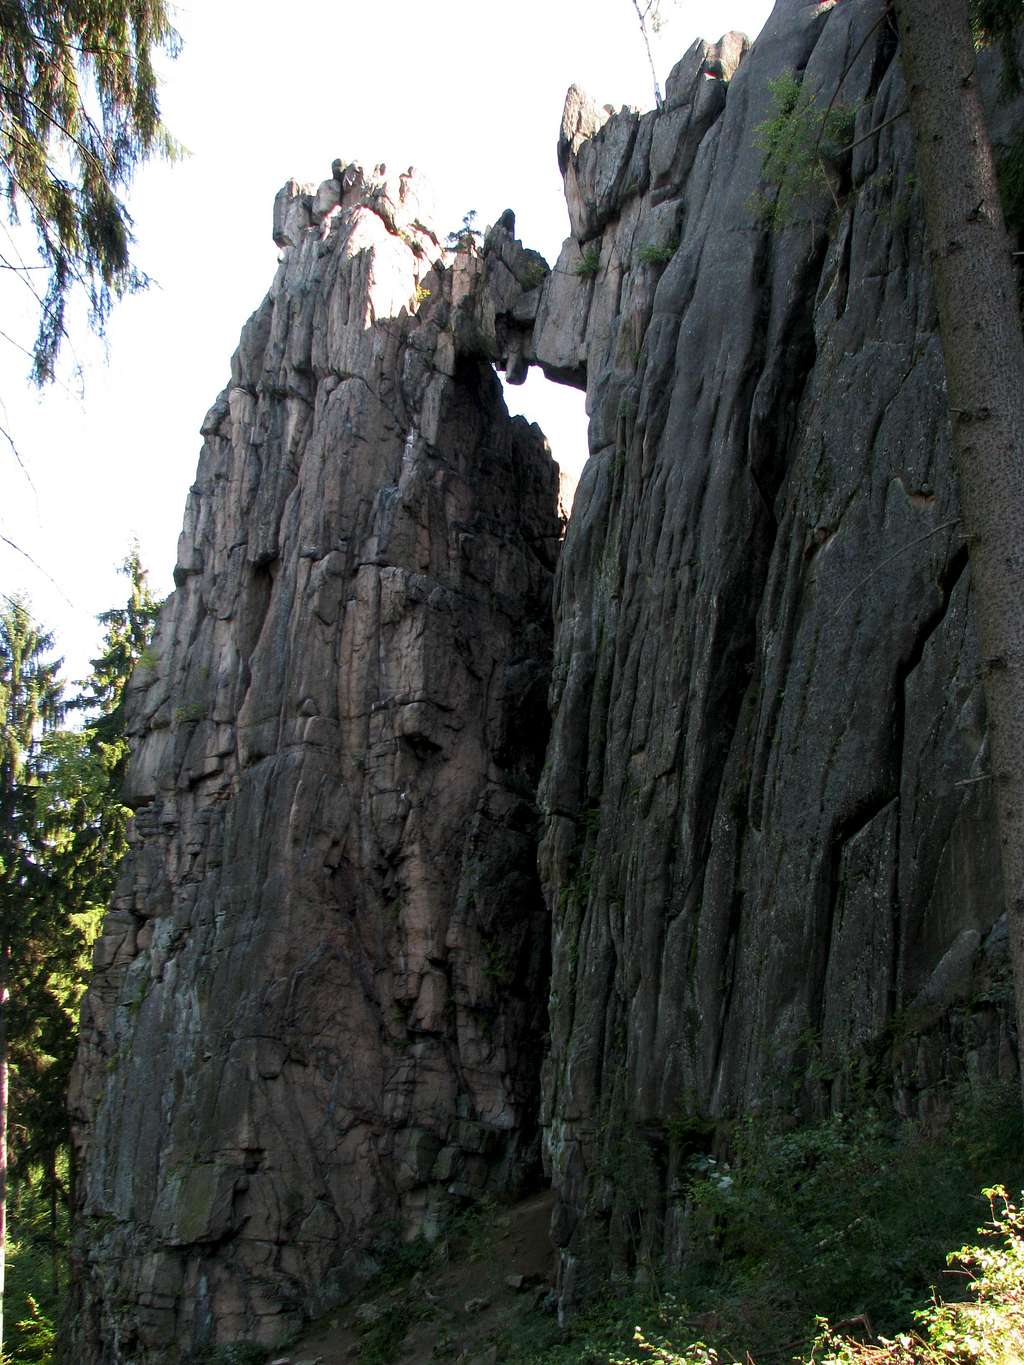 West face of Skalny Most